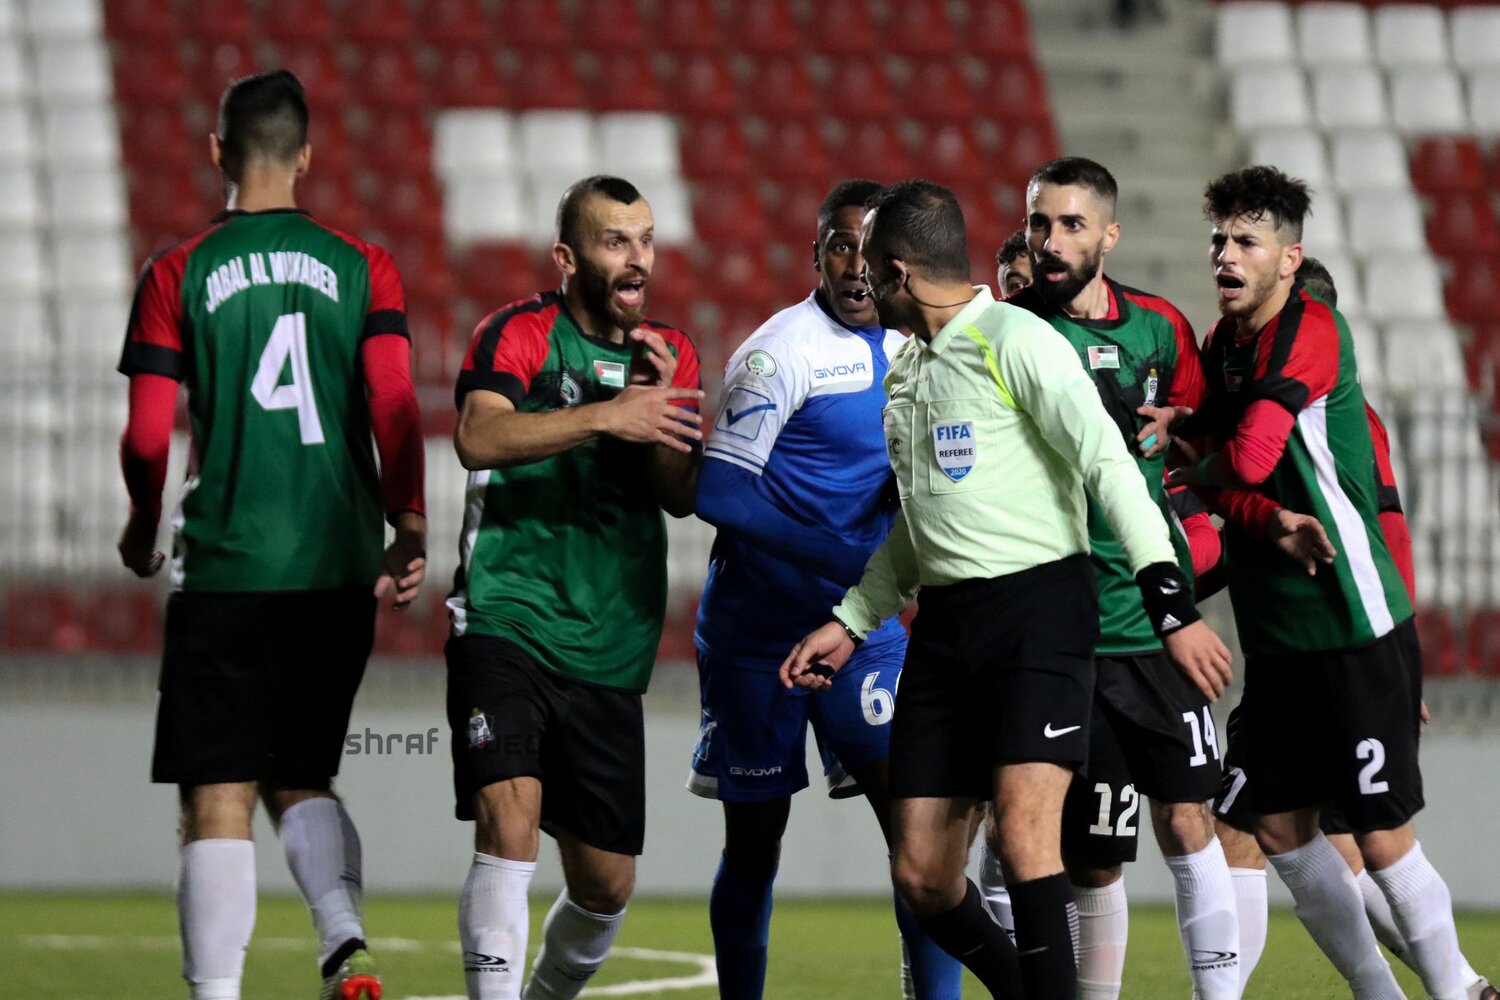 How a Palestinian Soccer Player Went from the West Bank to Europe's Elite